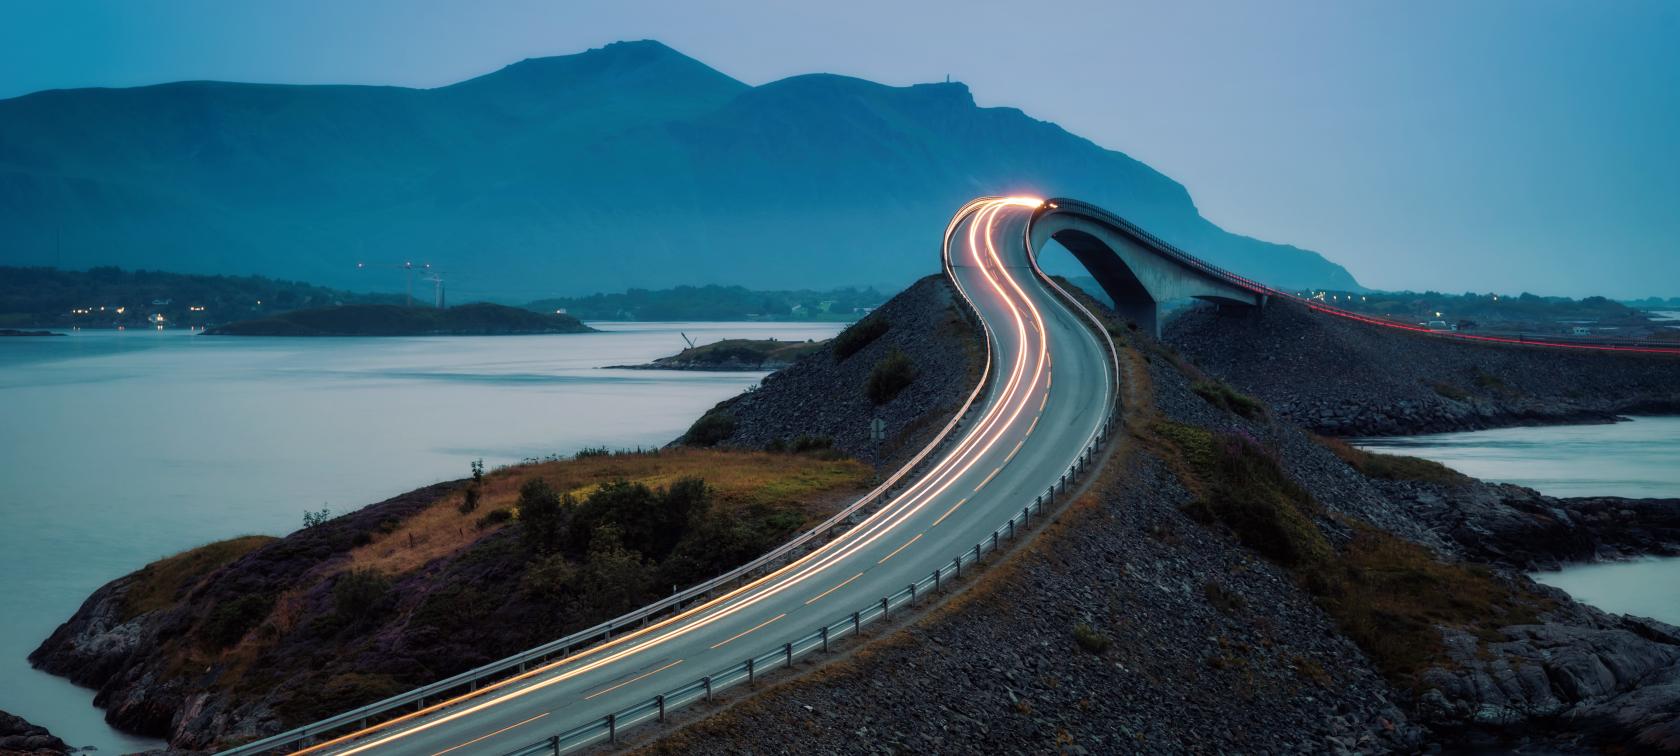 10 Most Amazing Roads In The World - AzCarBlog